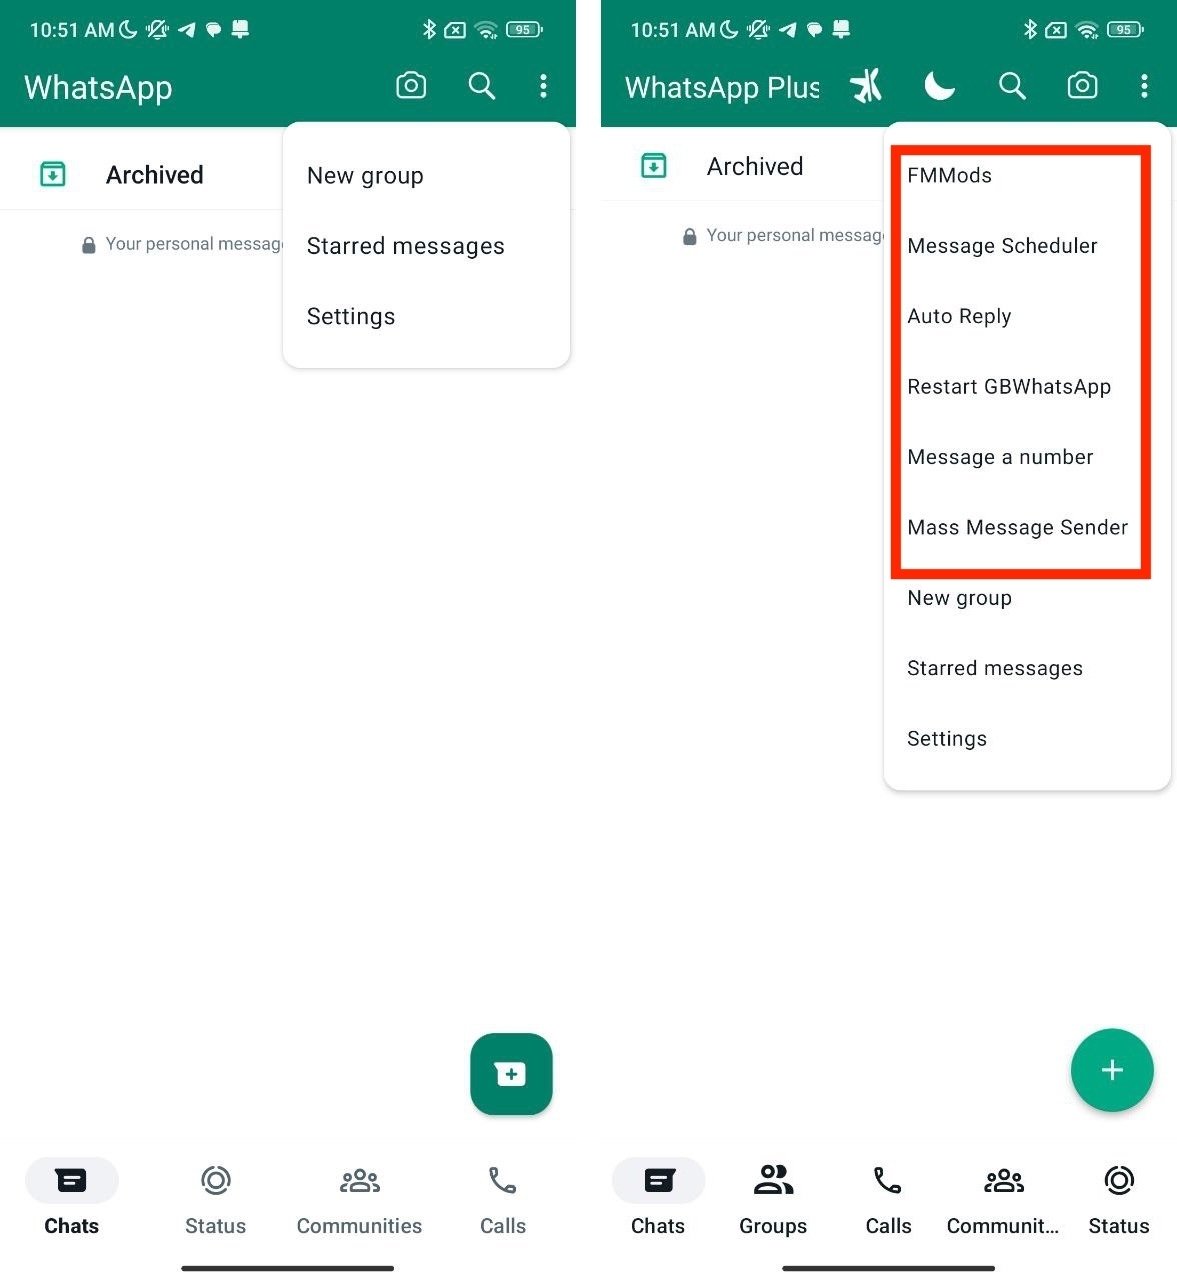 Differences between WhatsApp and WhatsApp plus on the main menu